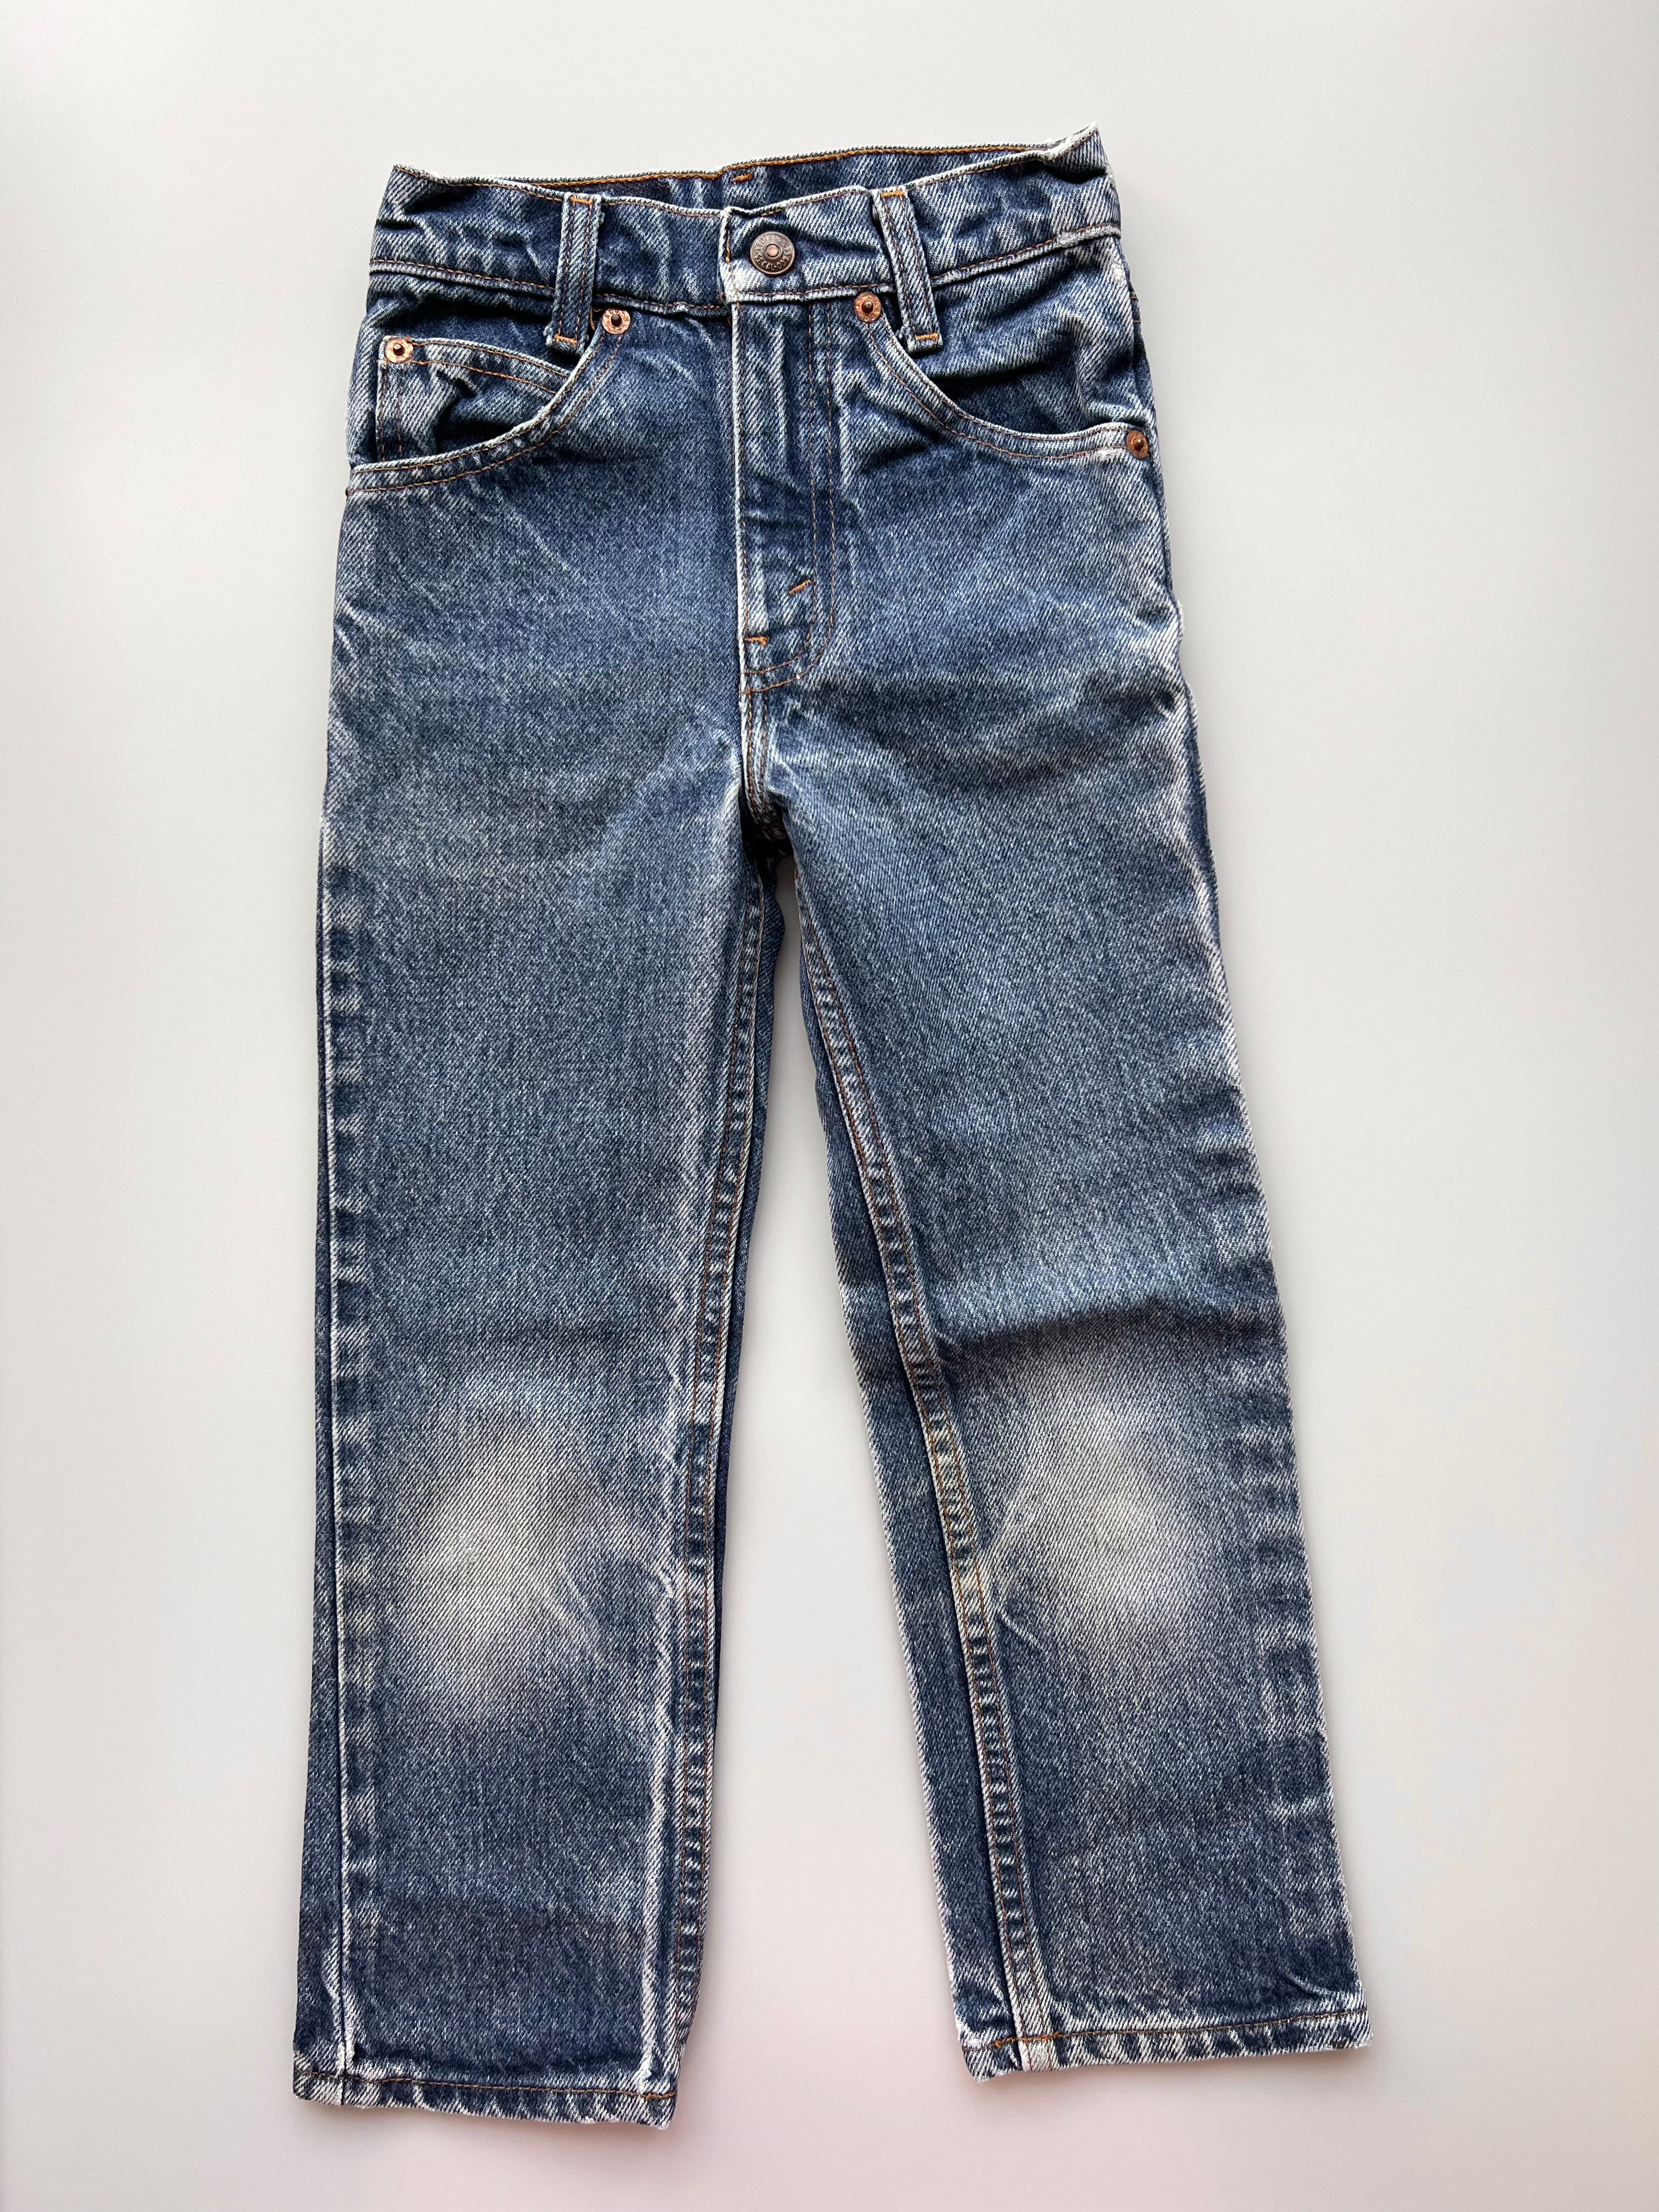 Levi's Perfect Vintage USA Made Stone Wash 501's Age 5-6